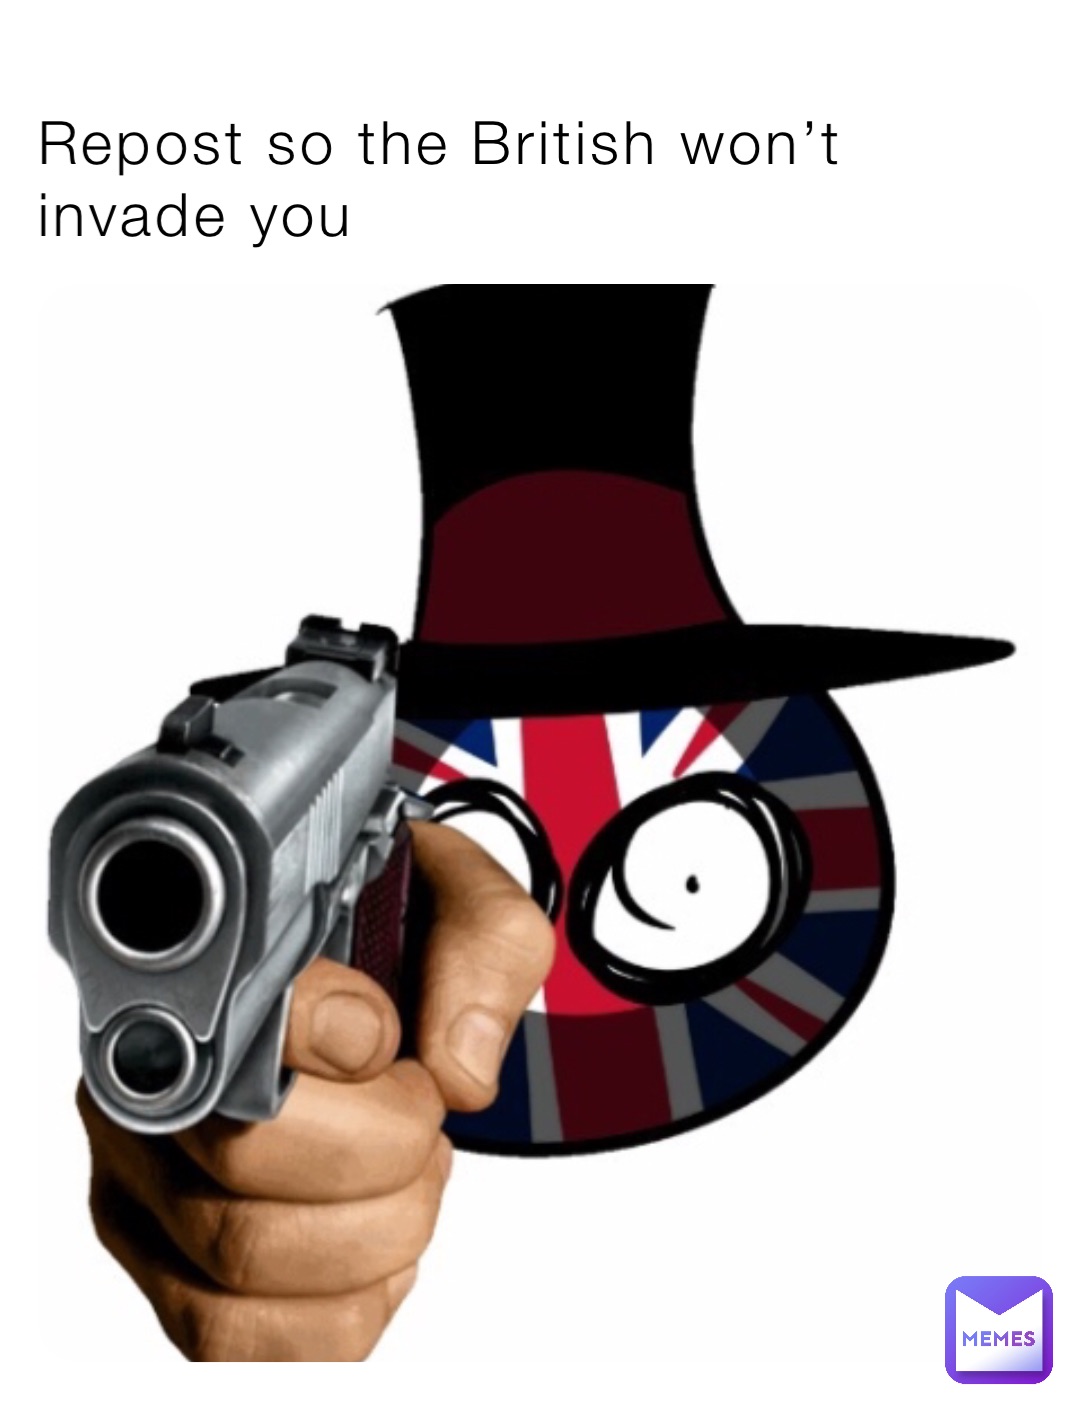 Repost so the British won’t invade you